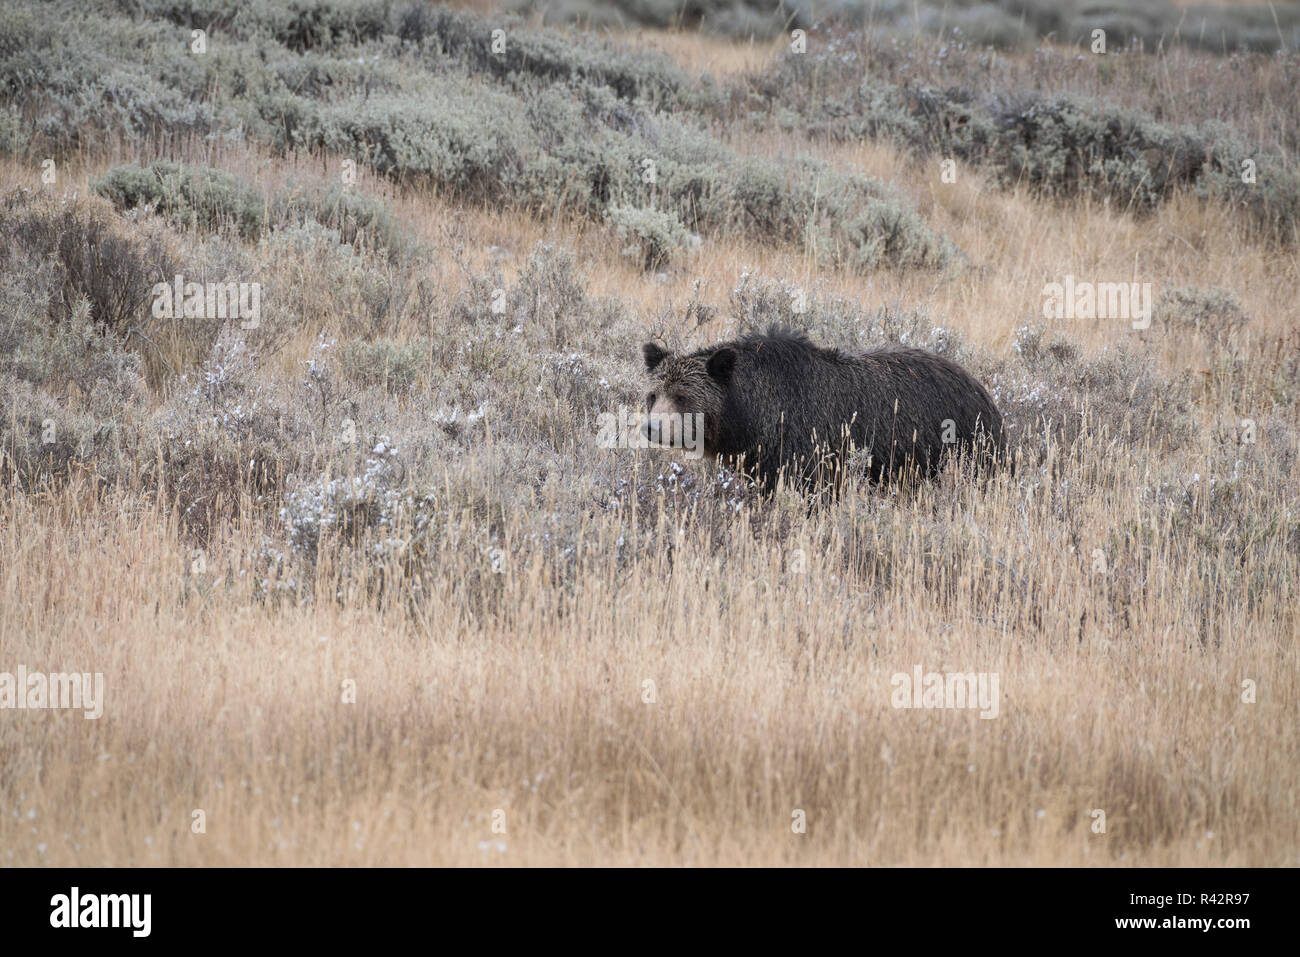 Grizzly bear in Yellowstone National Park, North America Stock Photo